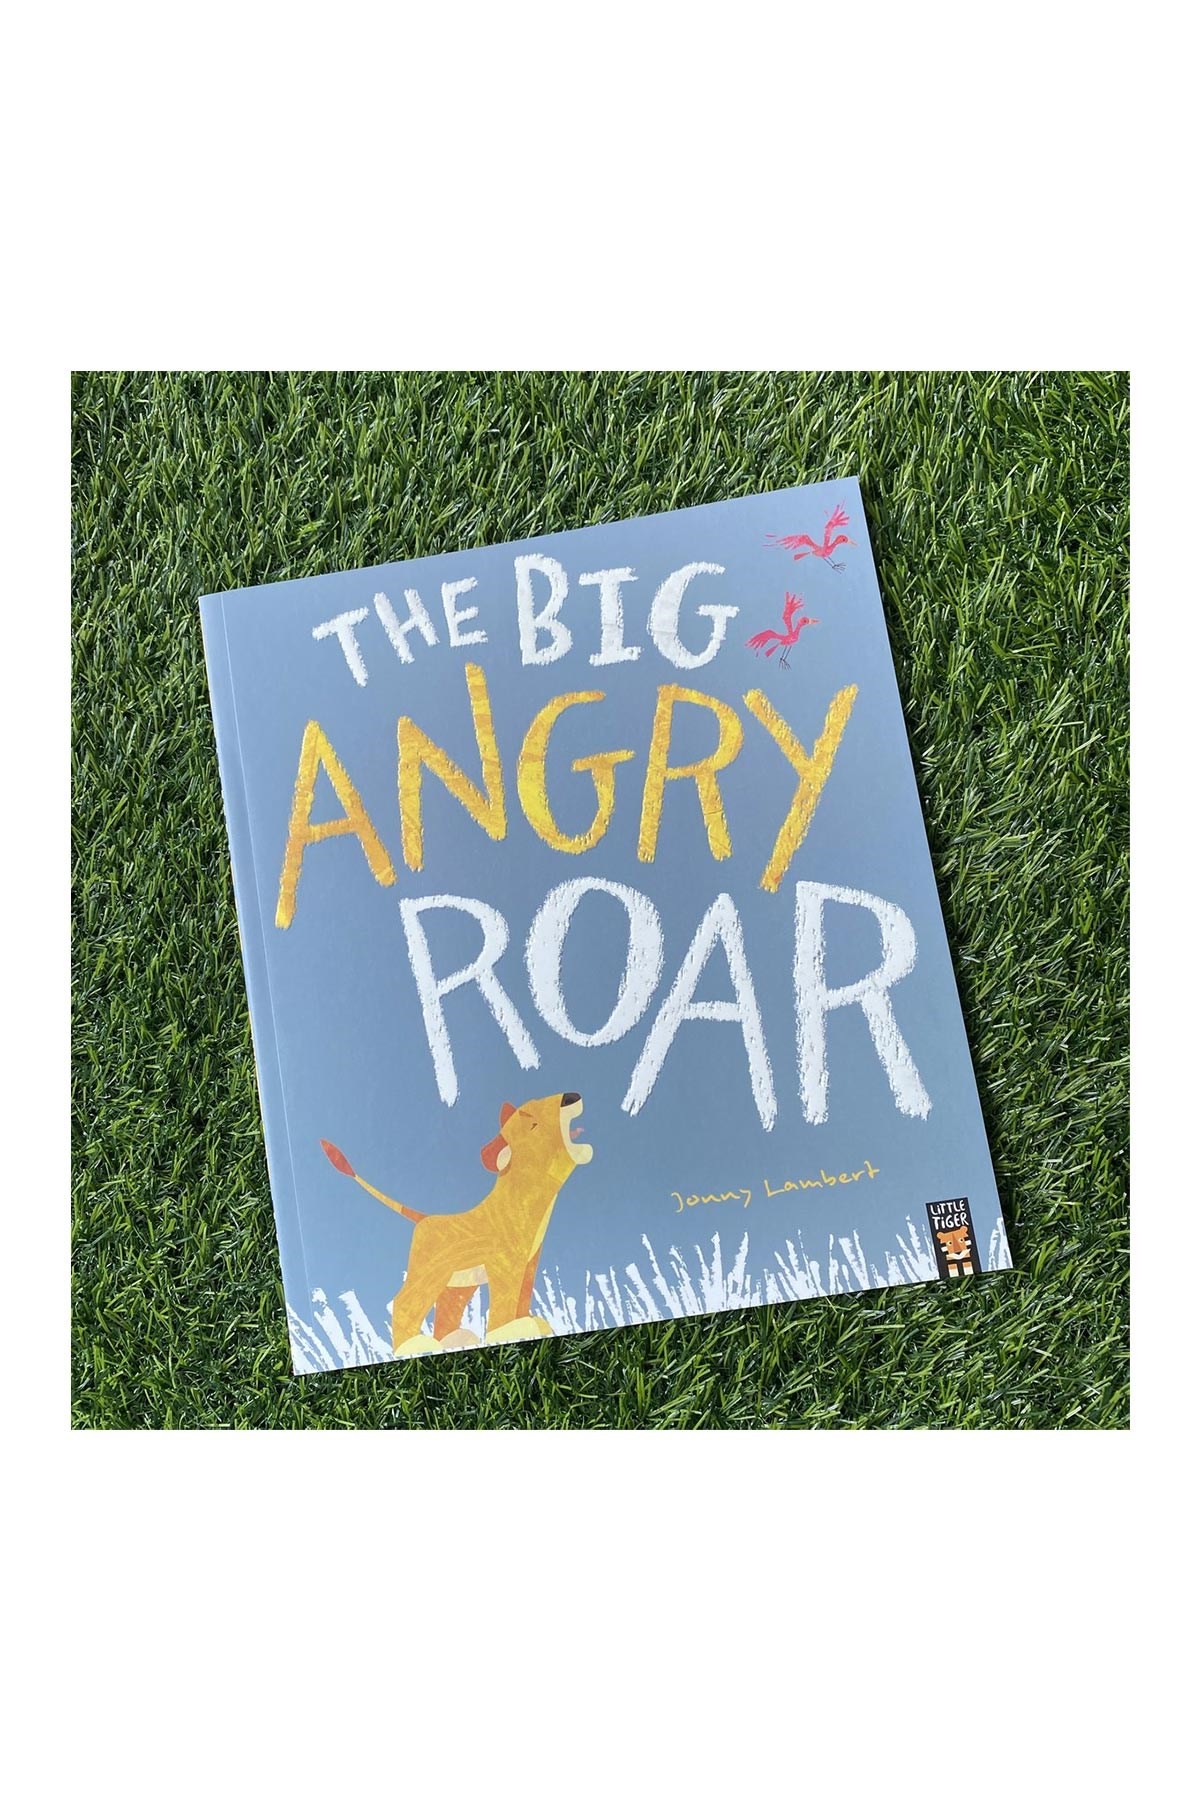 Tiger Tales The Big Angry Roar